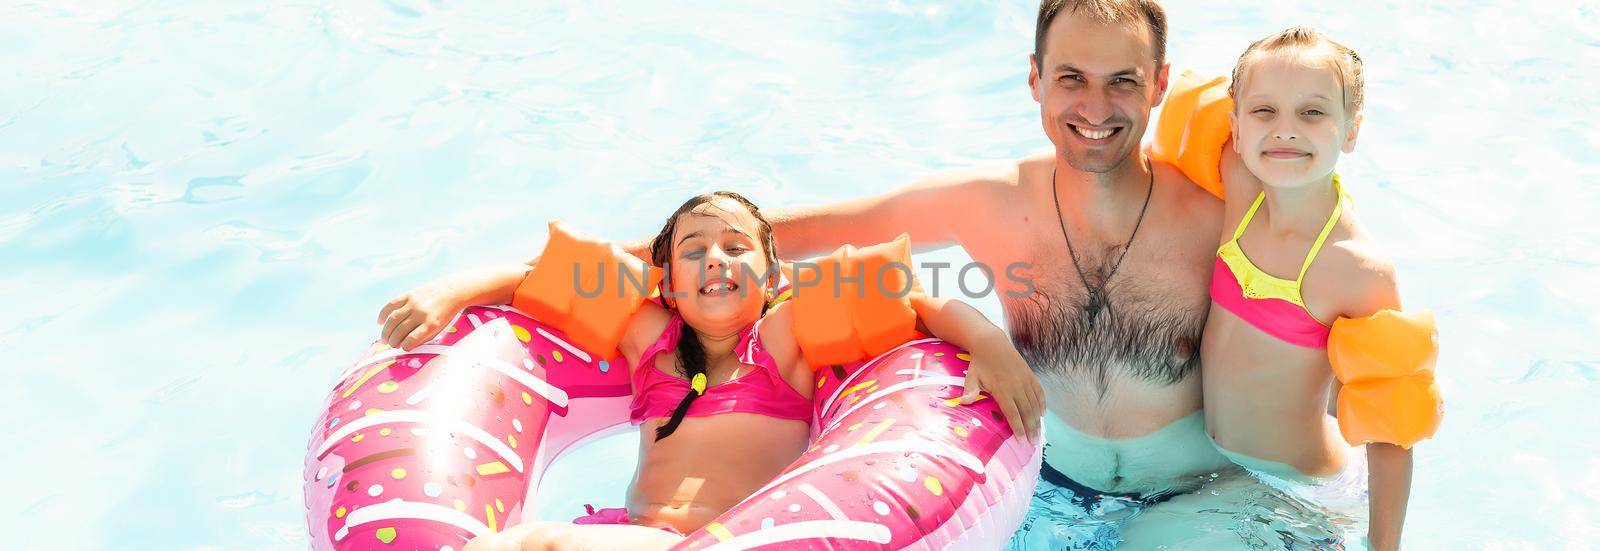 Children playing in pool. Two little girls having fun in the pool. Summer holidays and vacation concept.